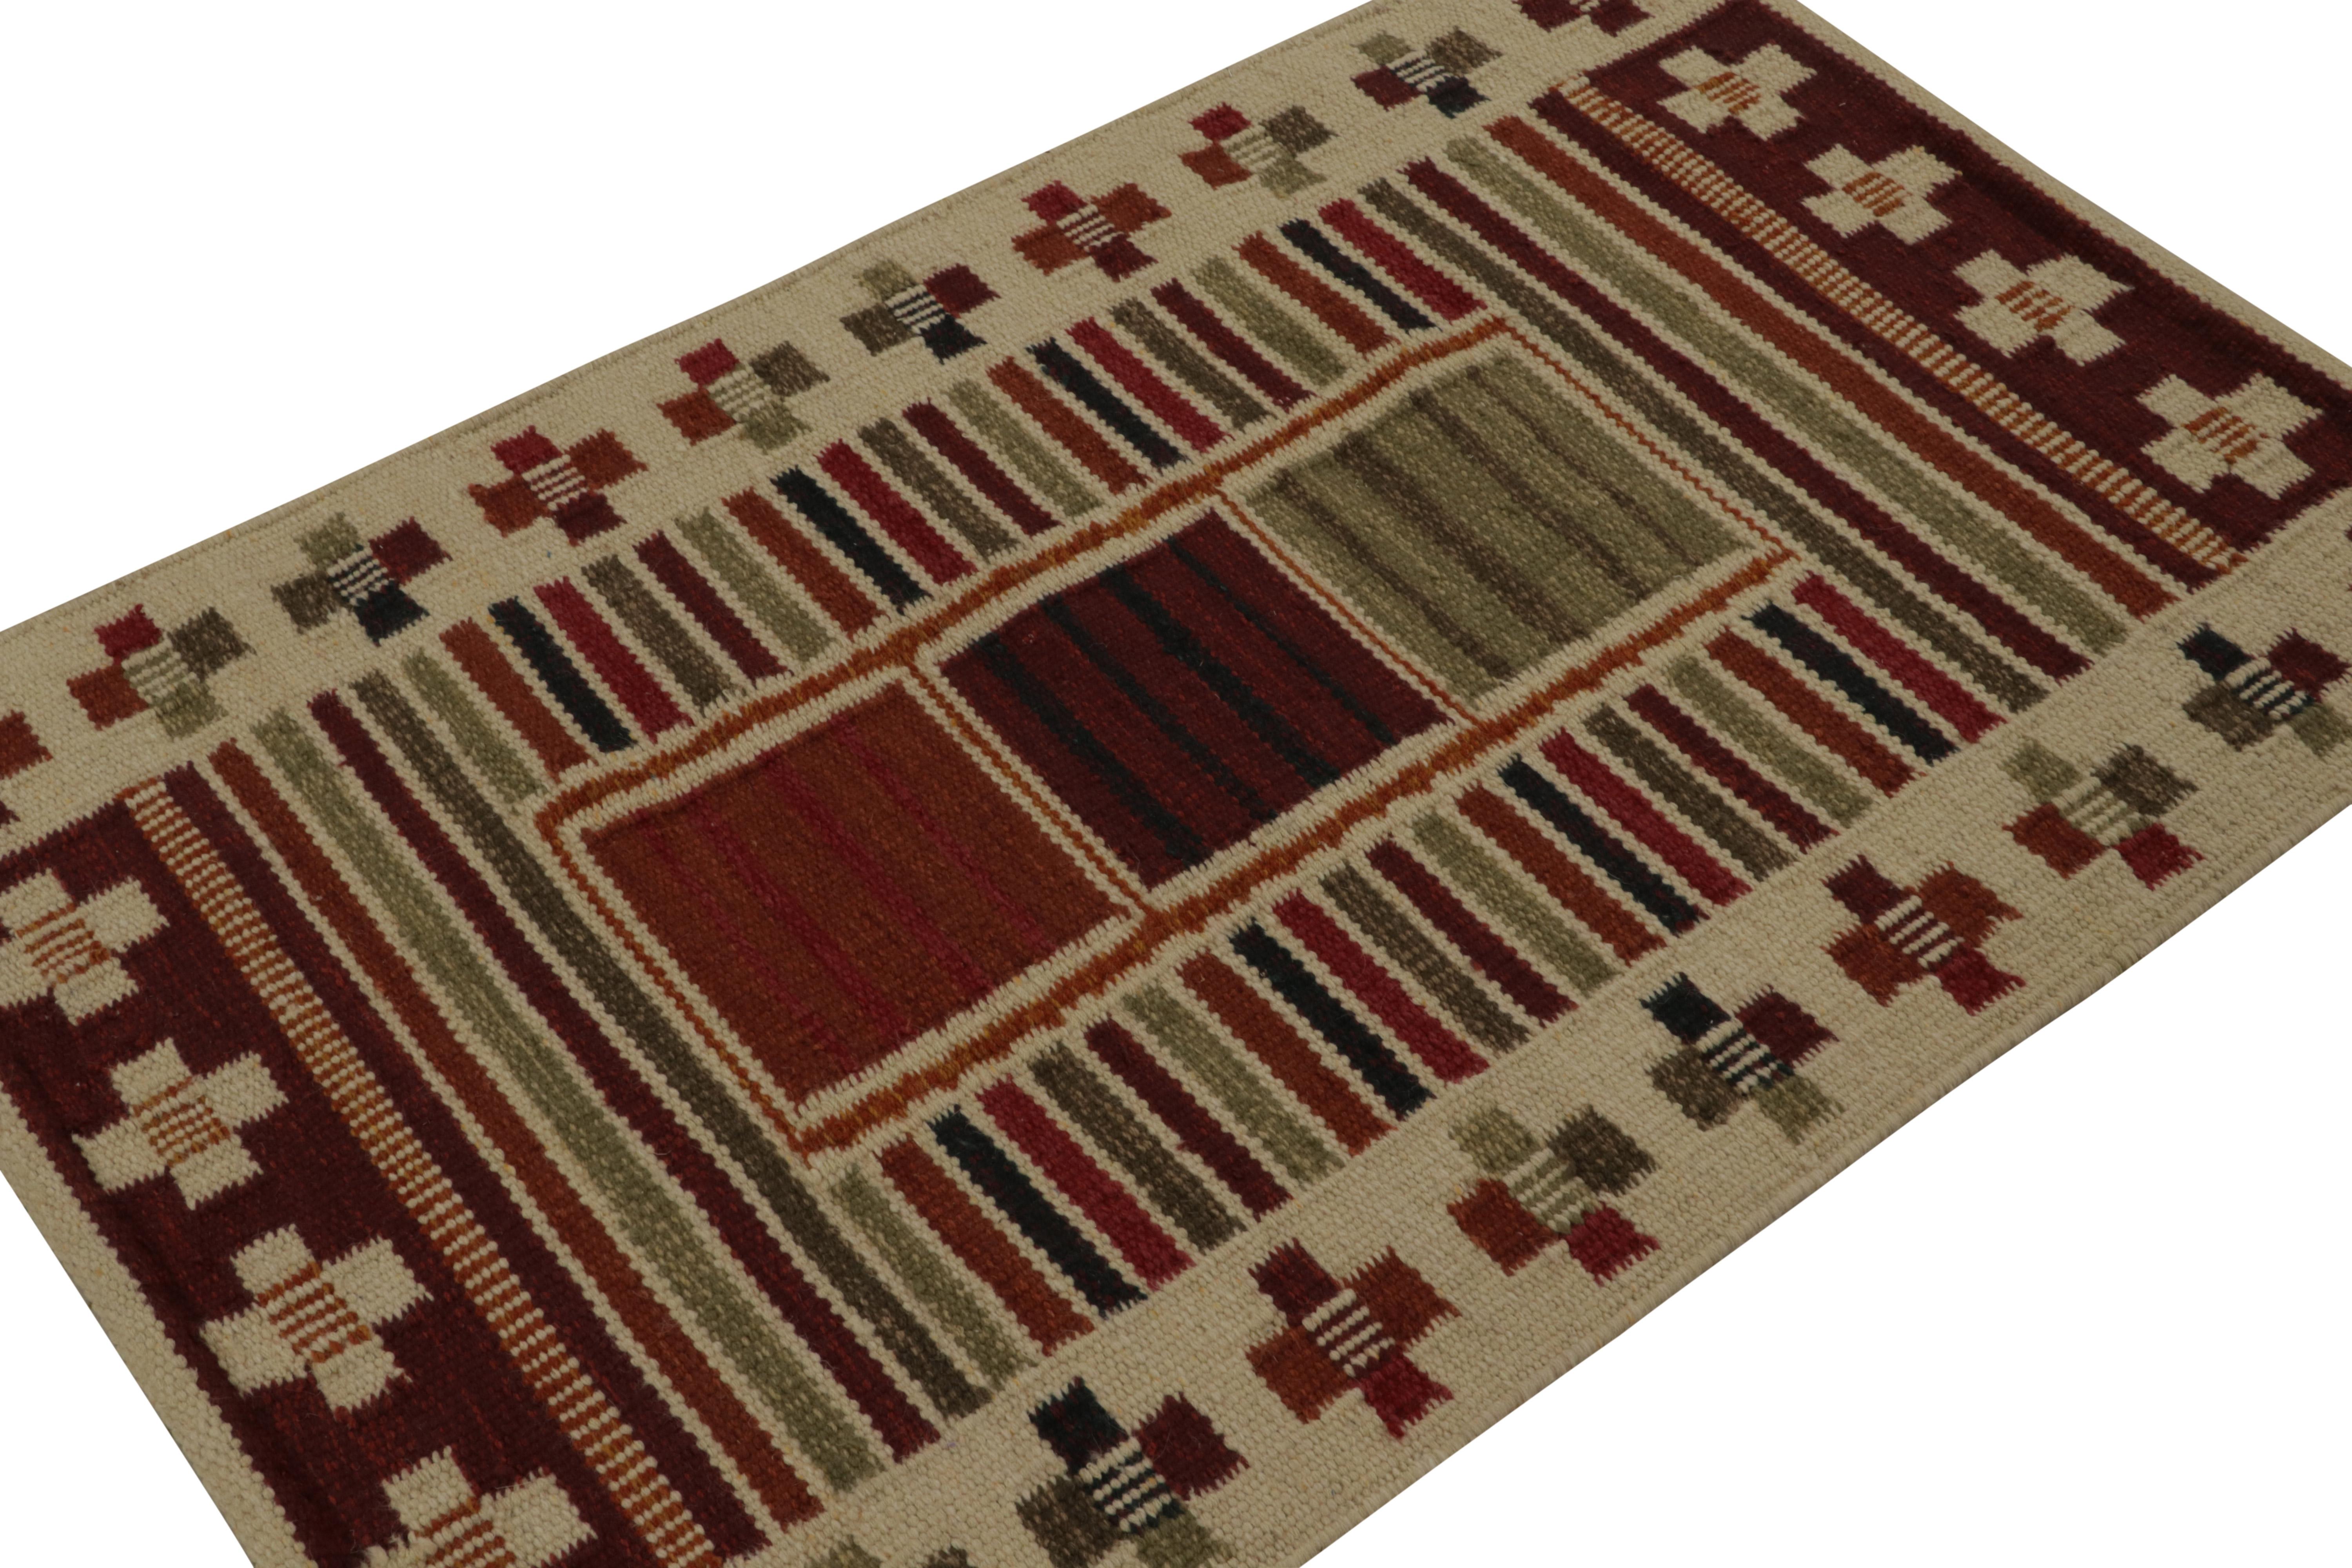 This 3x5 Kilim rug is from the flatweave line in the Scandinavian rug collection by Rug & Kilim. Handwoven in wool, cotton and natural yarns, its design is a modern take on Rollakan and Rya rugs in the Swedish Deco style. 

On the Design: 

These